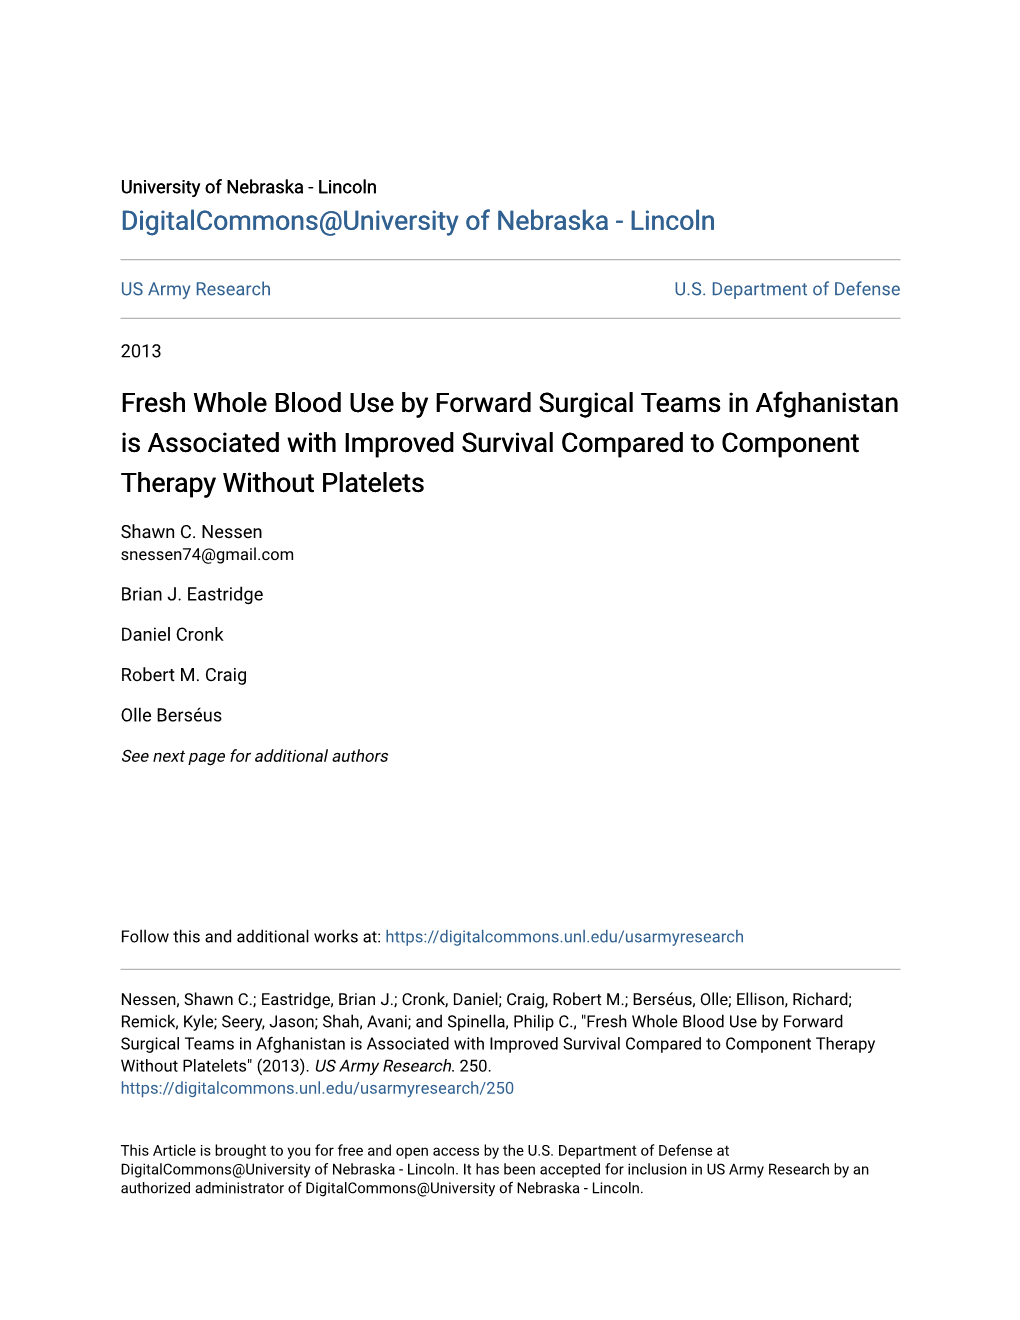 Fresh Whole Blood Use by Forward Surgical Teams in Afghanistan Is Associated with Improved Survival Compared to Component Therapy Without Platelets